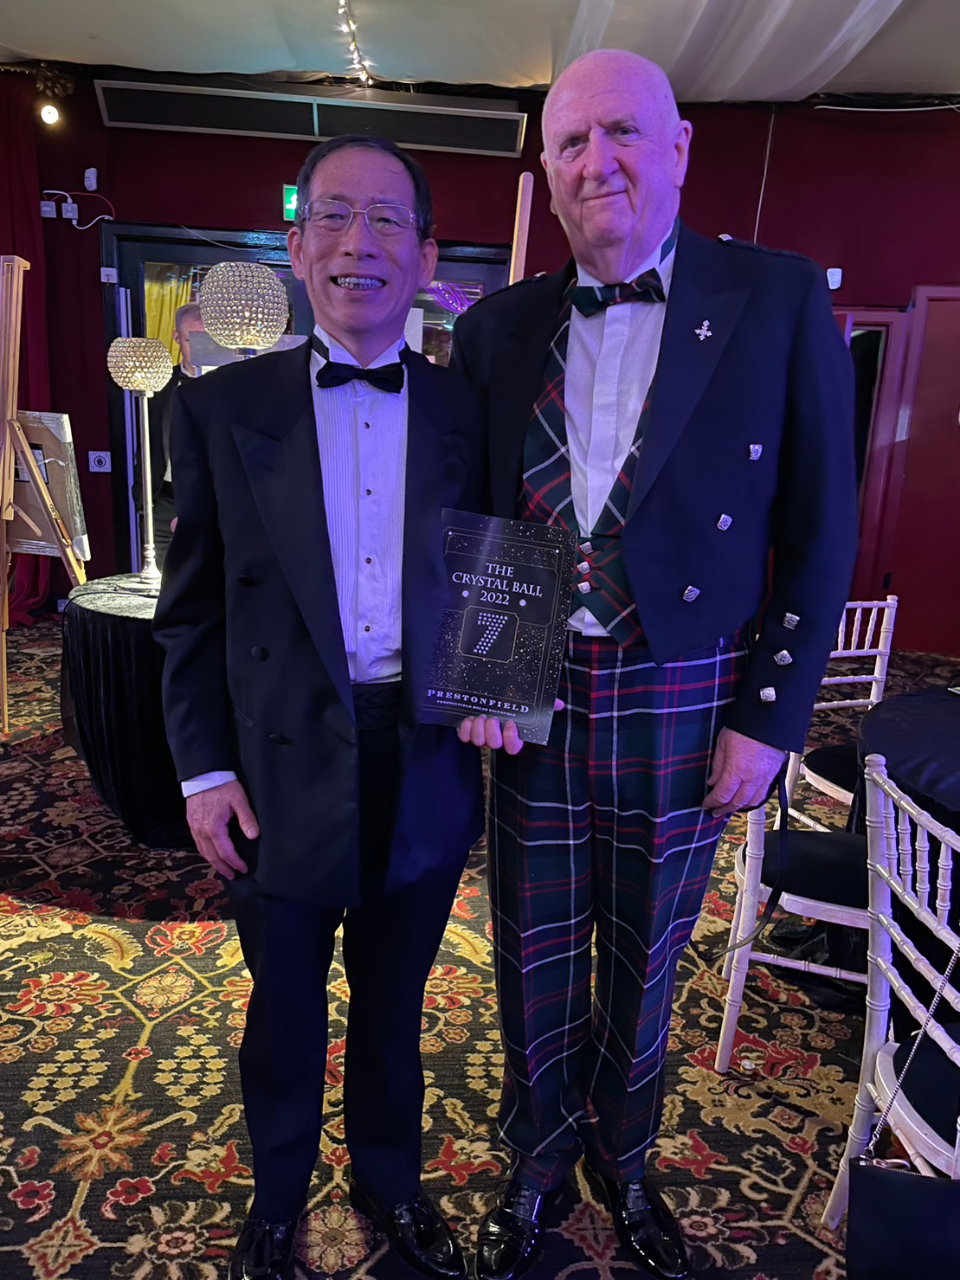 DG Chang attended Crystal Ball in aid of Alzheimer Scotland on Saturday 19th November 2022